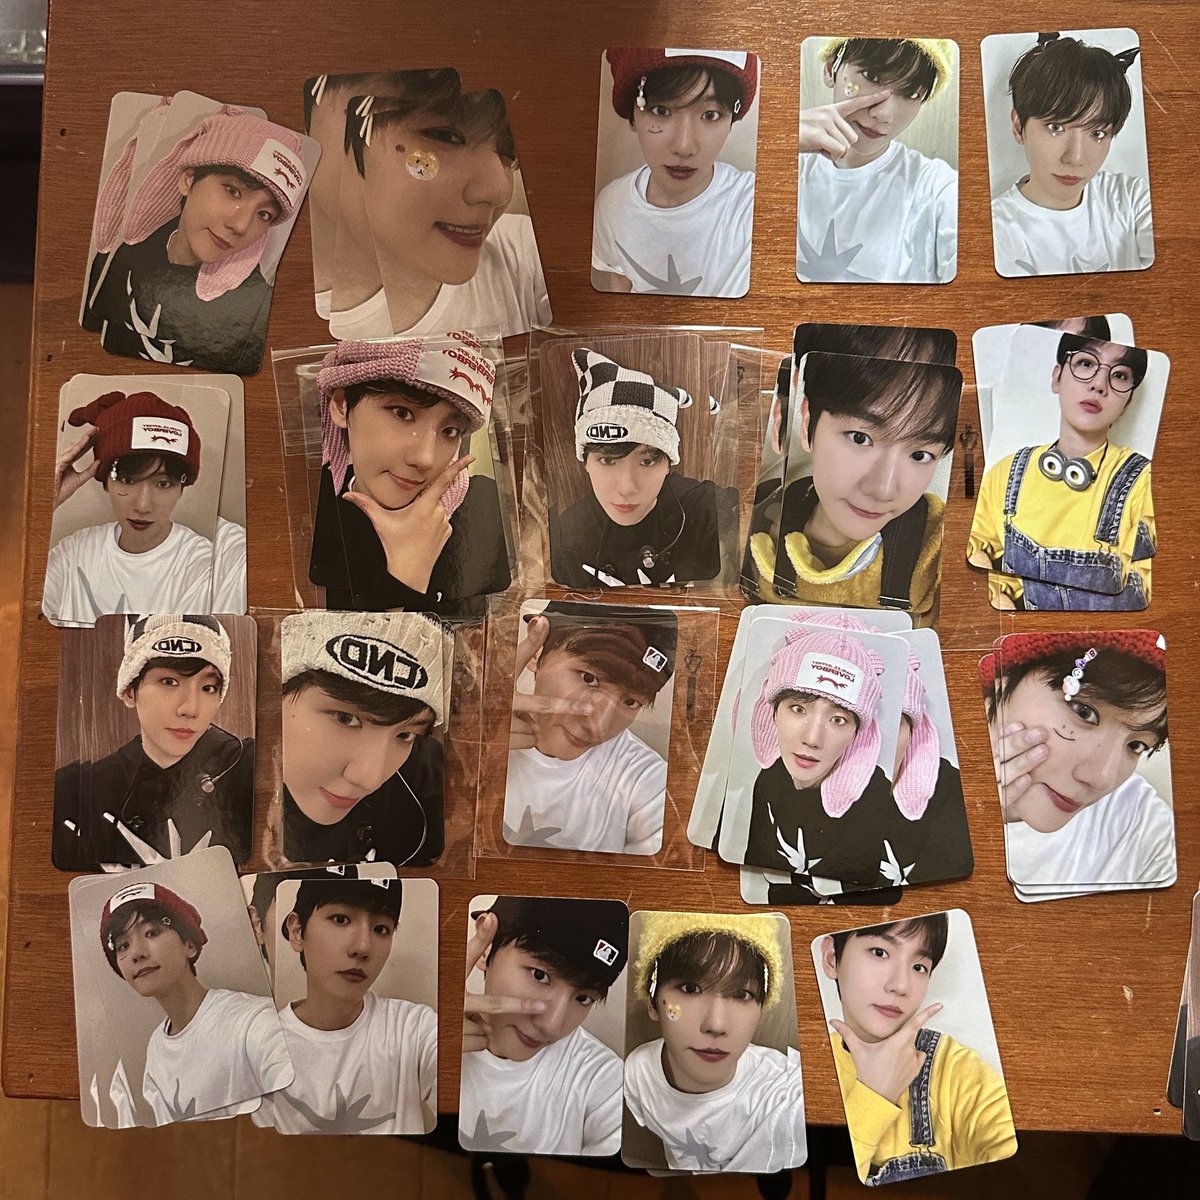 all 20 photocards from baekhyun's cafe event: stock0506 🥹💛